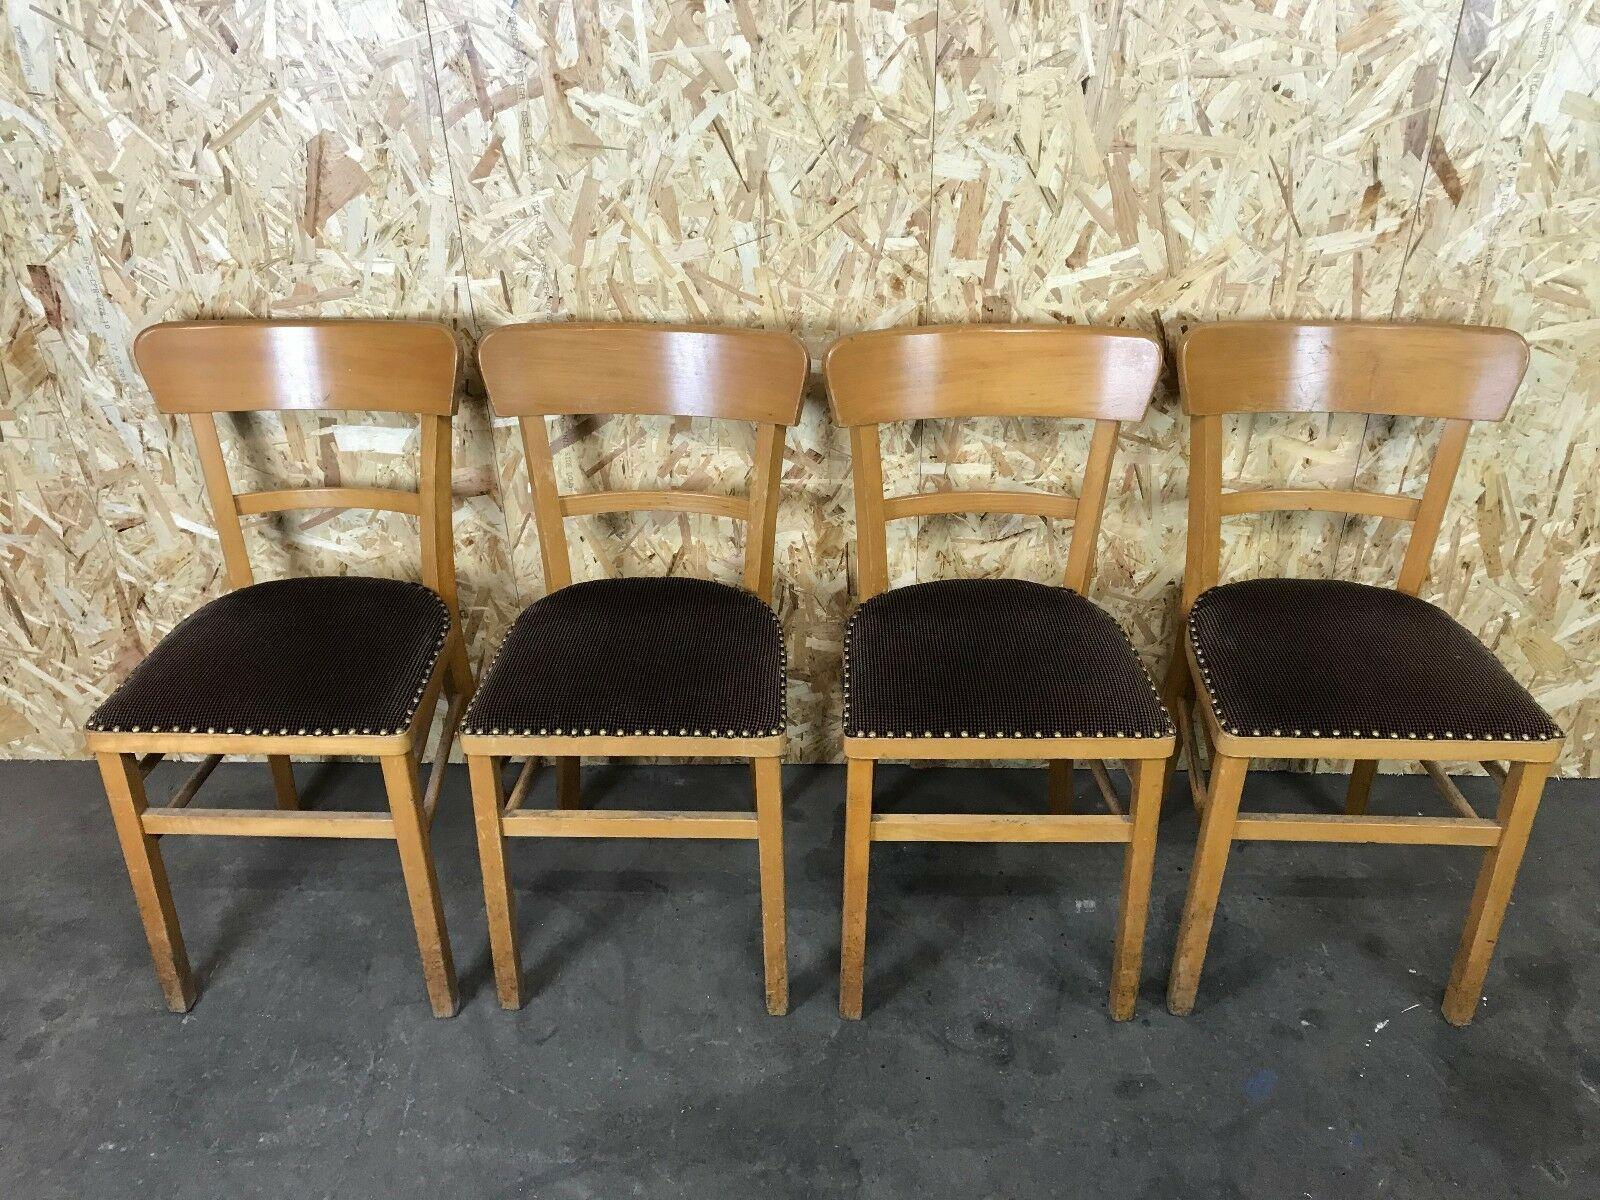 4x 50s 60s chair chairs Frankfurt chair Bauhaus Mid Century Design 50s

Object: 4x chair

Manufacturer:

Condition: good

Age: around 1950-1960

Dimensions:

40cm x 49cm x 82cm
Seat height = 48cm

Other notes:

The pictures serve as part of the